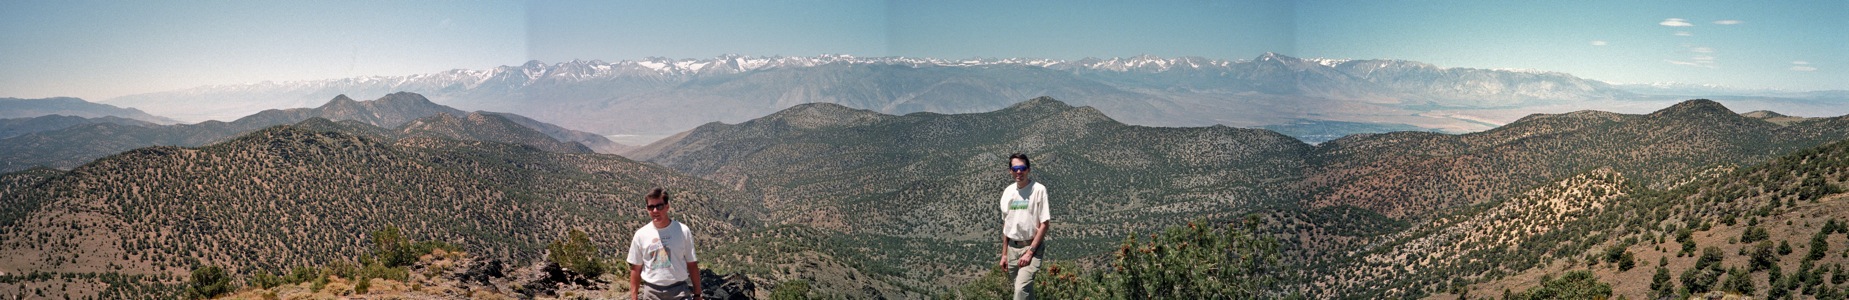 Sierra View from White Mountains - 7/1996